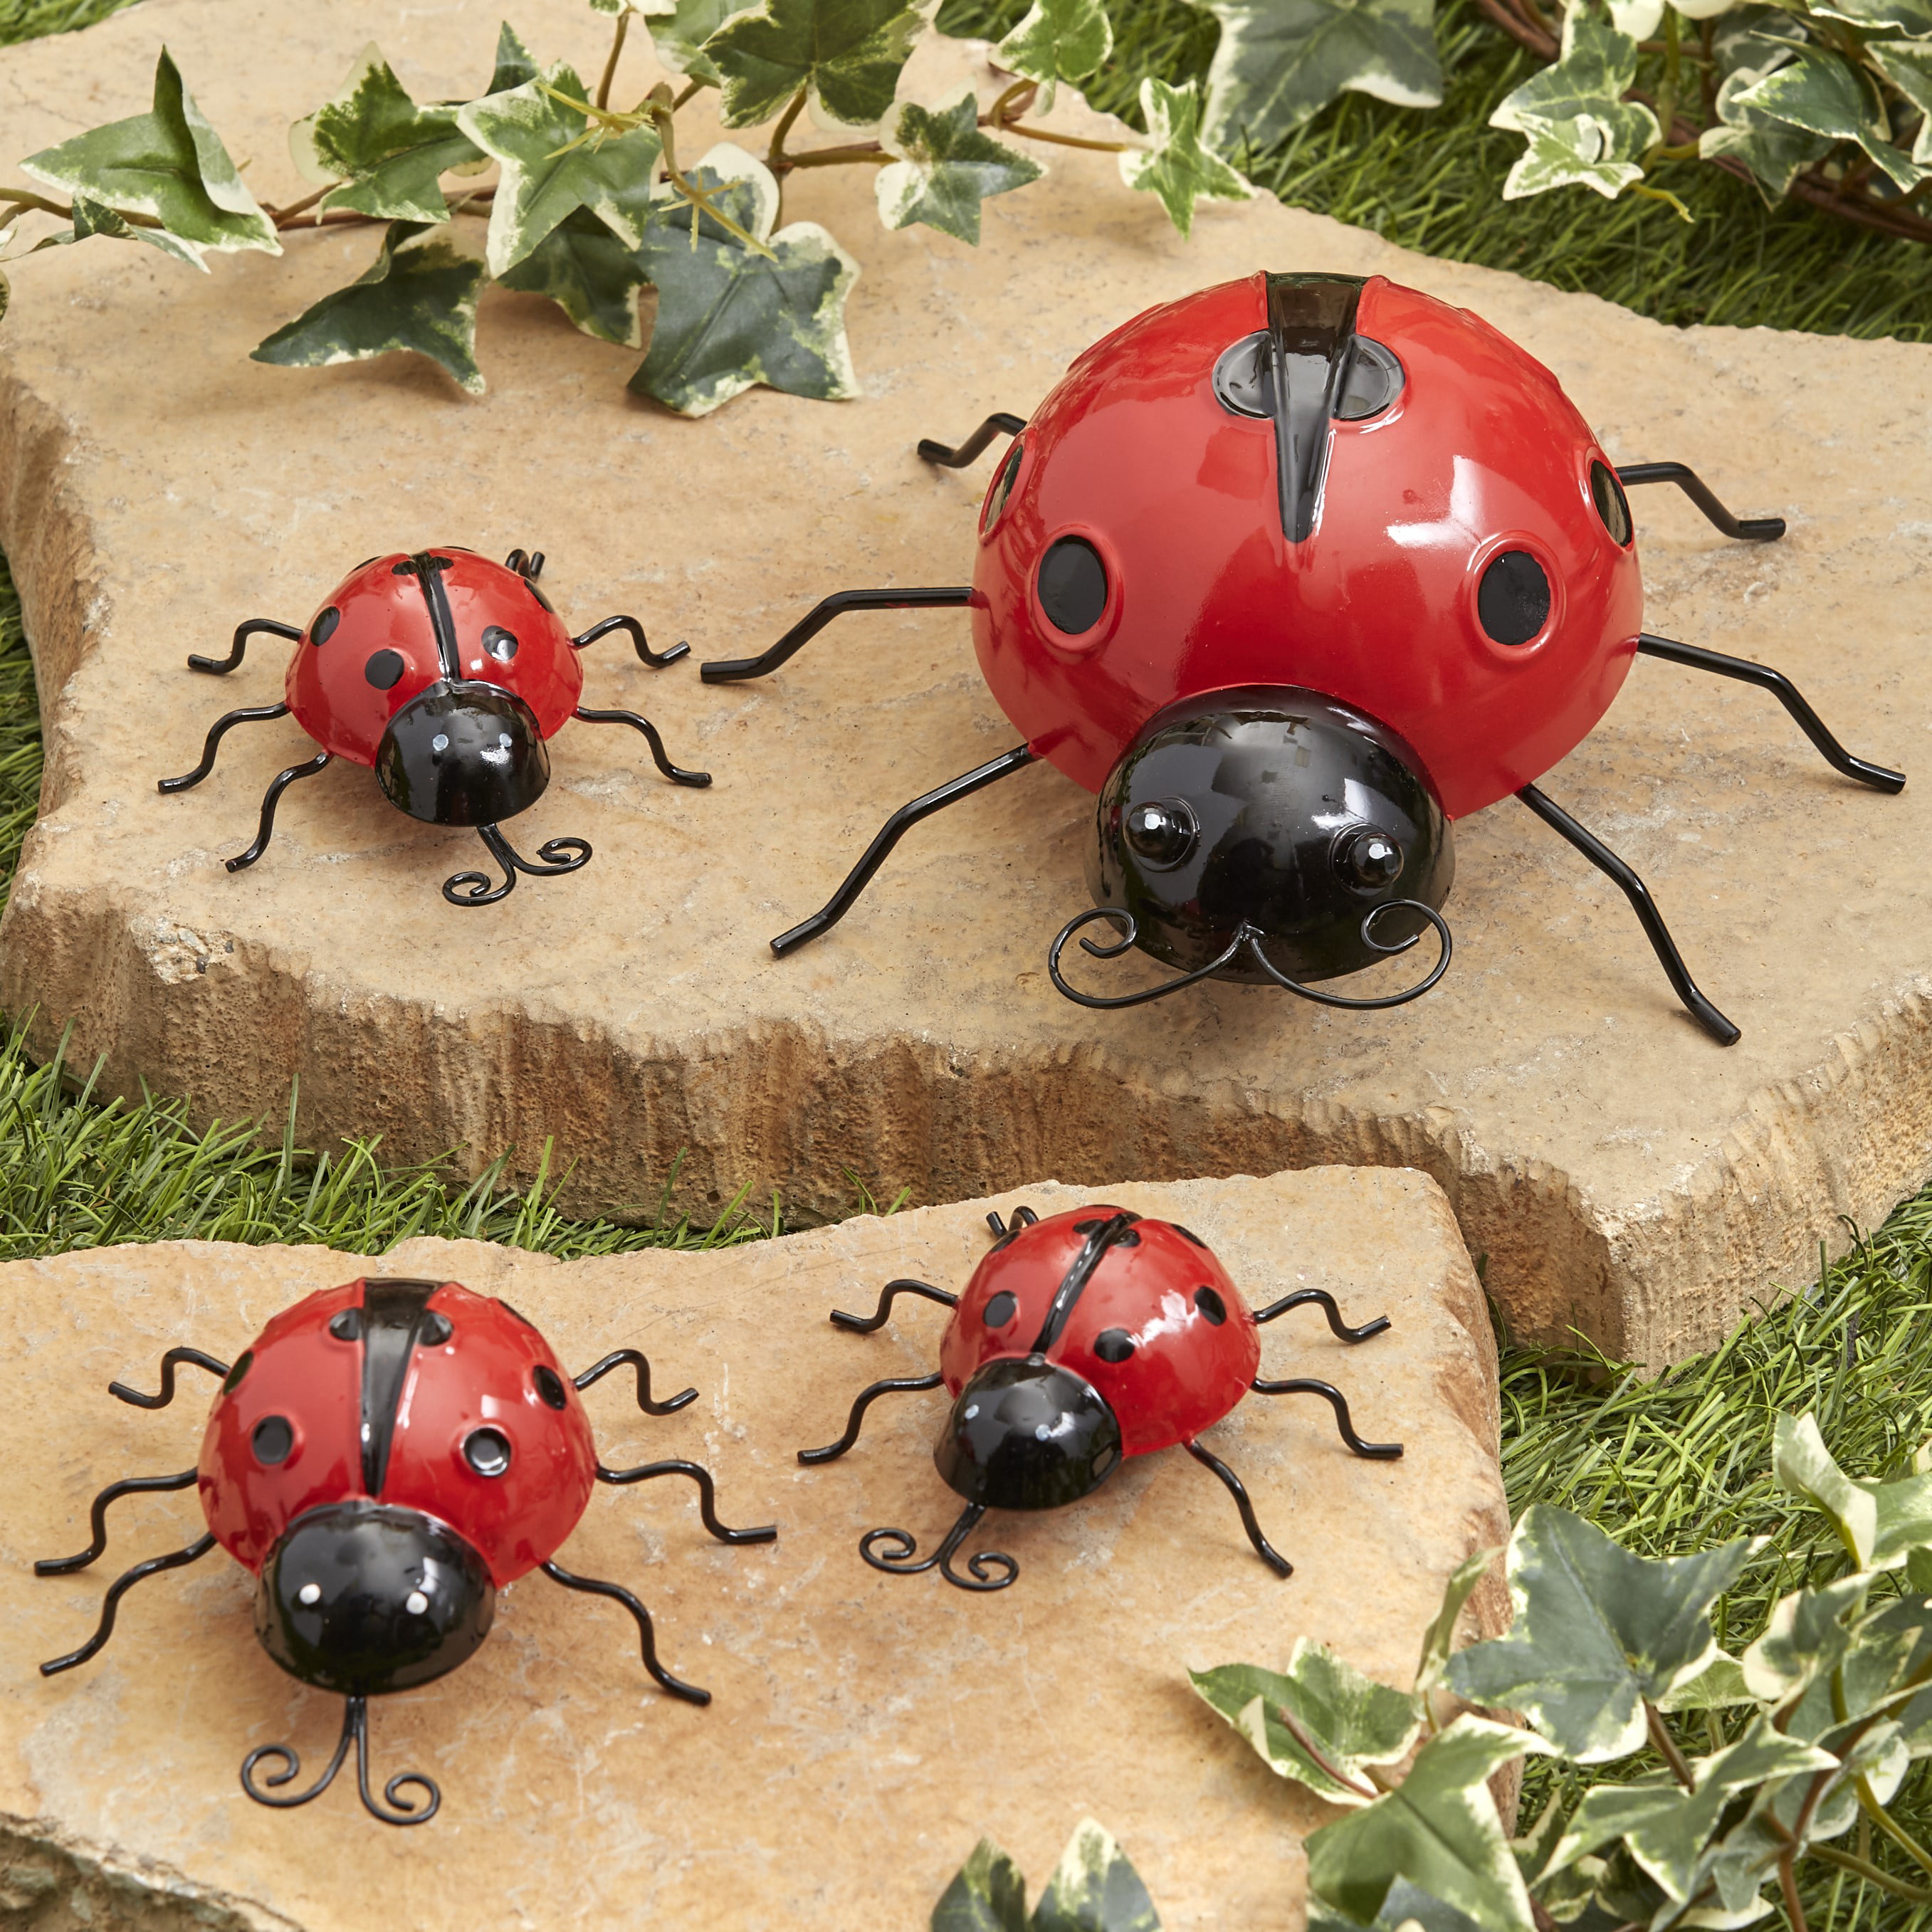 Metal Ladybug Figurines Insect Statue Grassland Tree Lawn Decor Kids Toys Red 